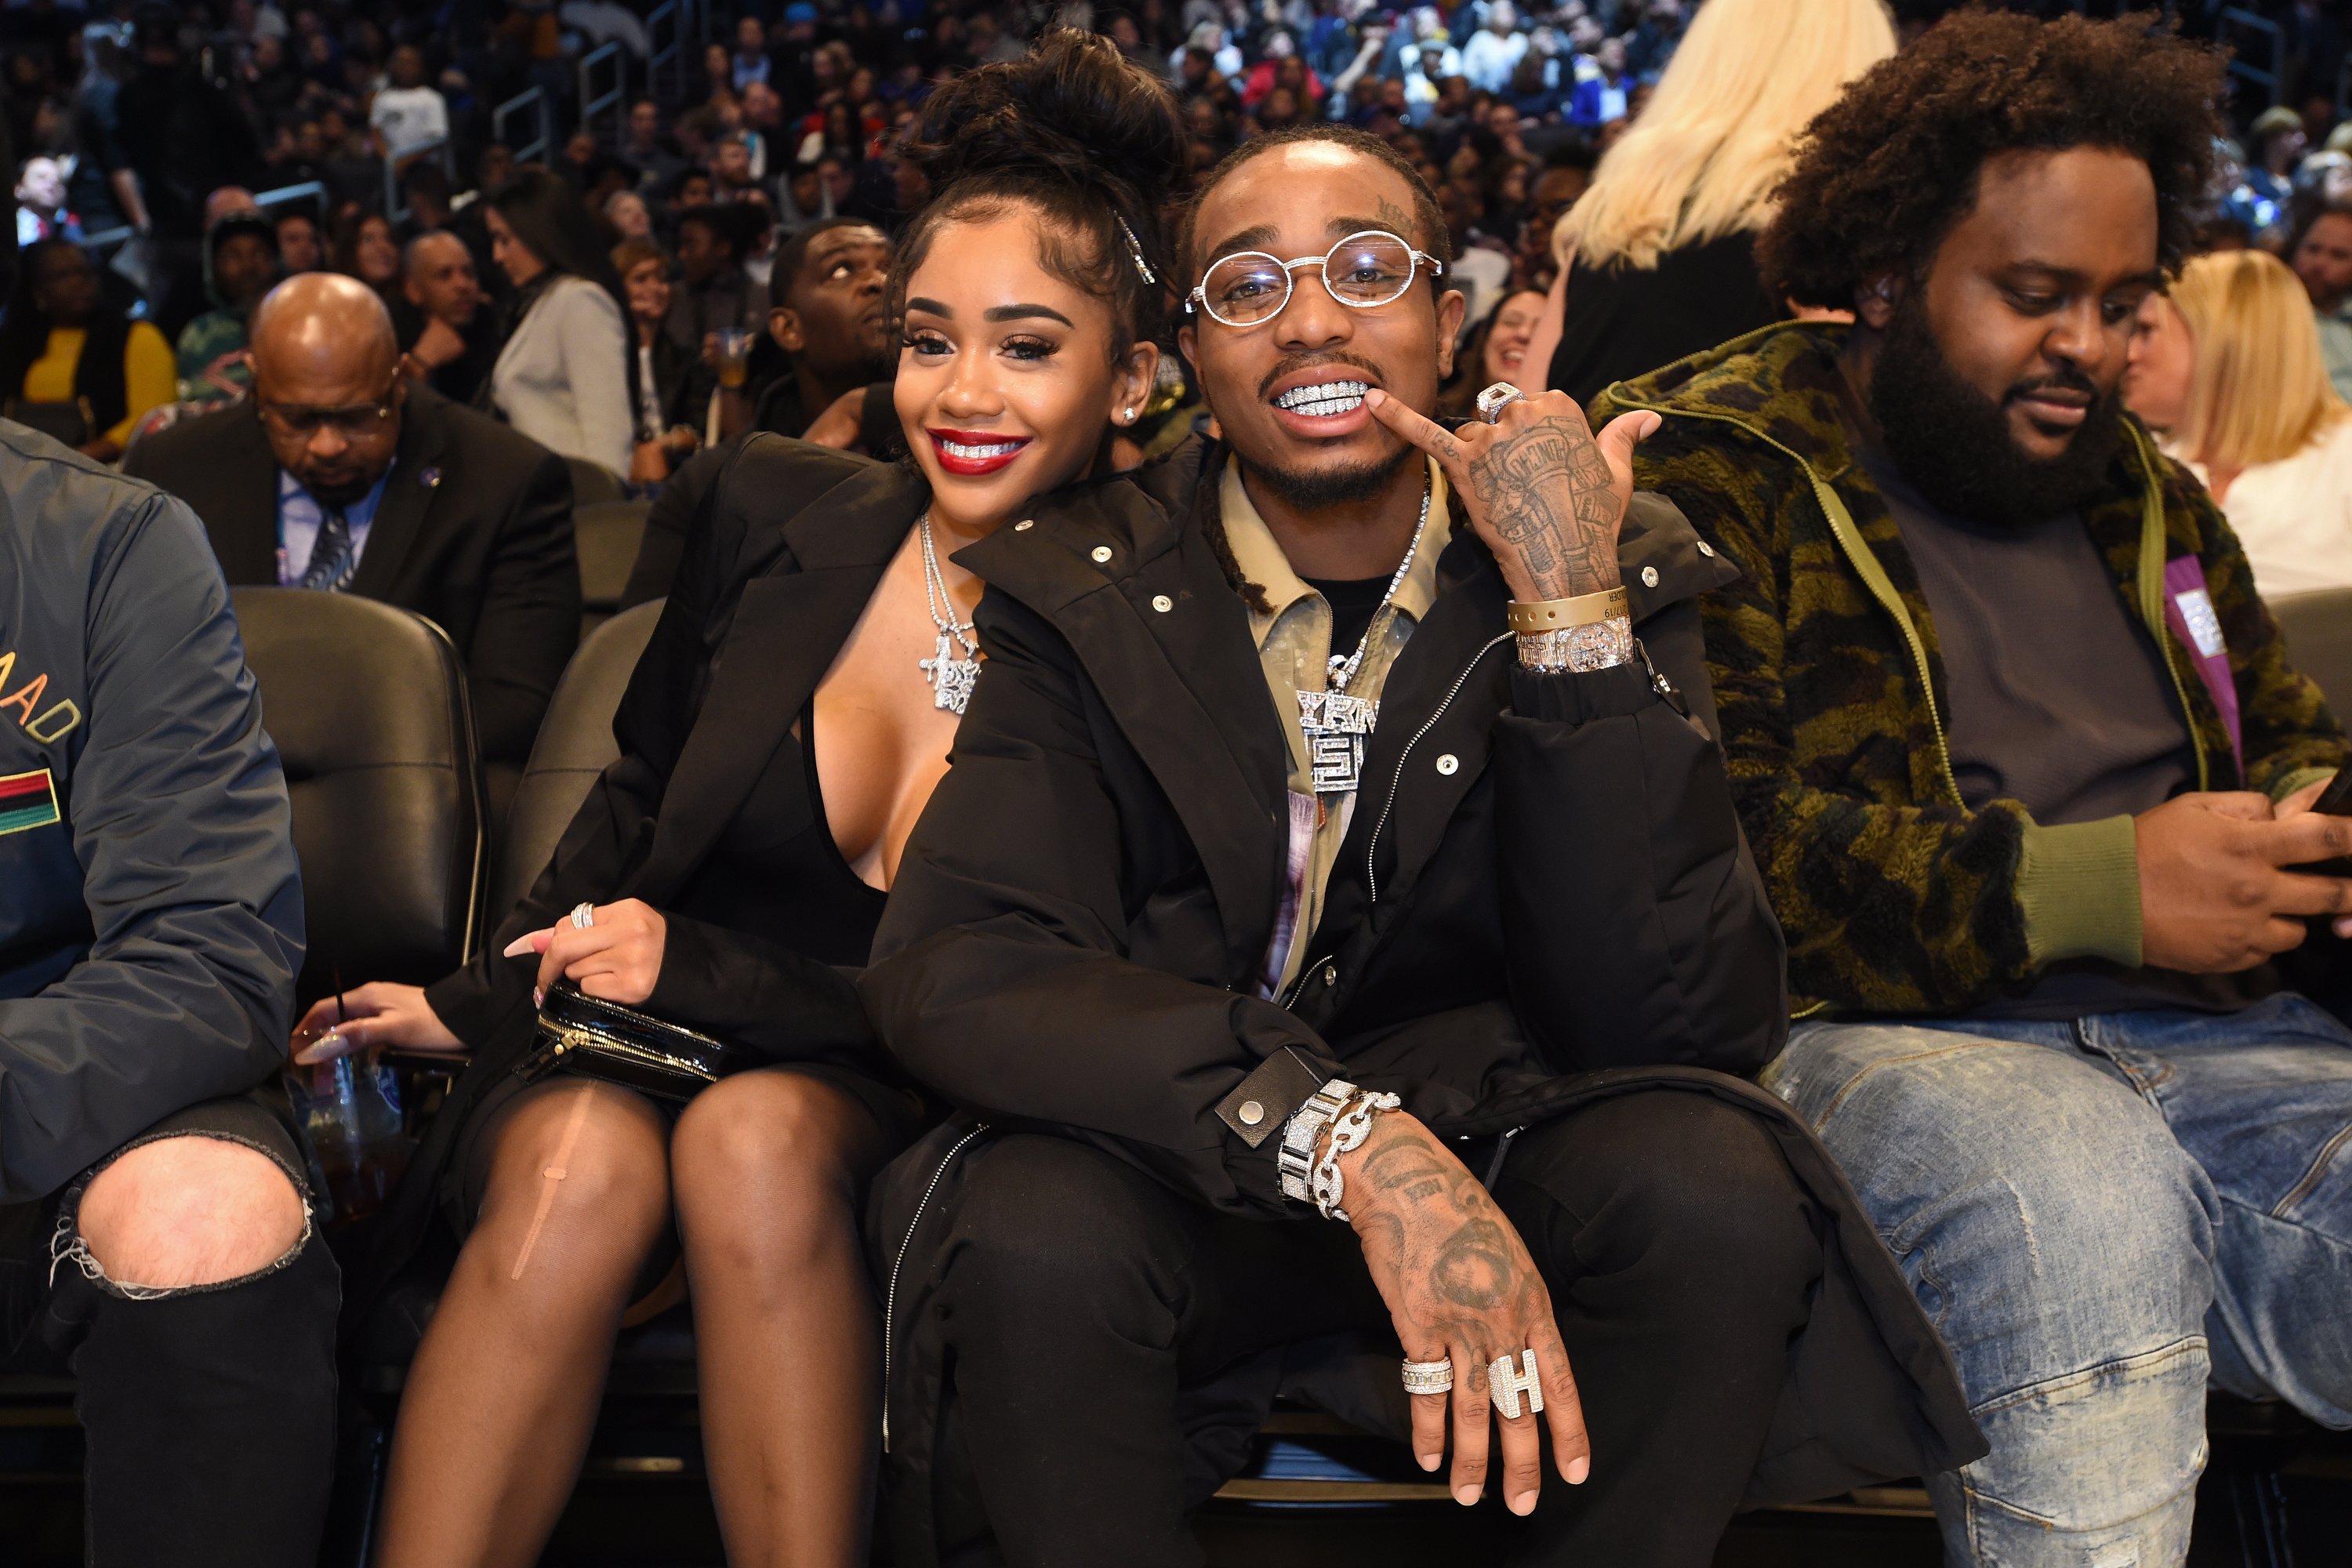 Saweetie and Quavo during the 2019 NBA All-Star Game at Spectrum Center in Charlotte, North Carolina, on February 17, 2019. | Source: Getty Images